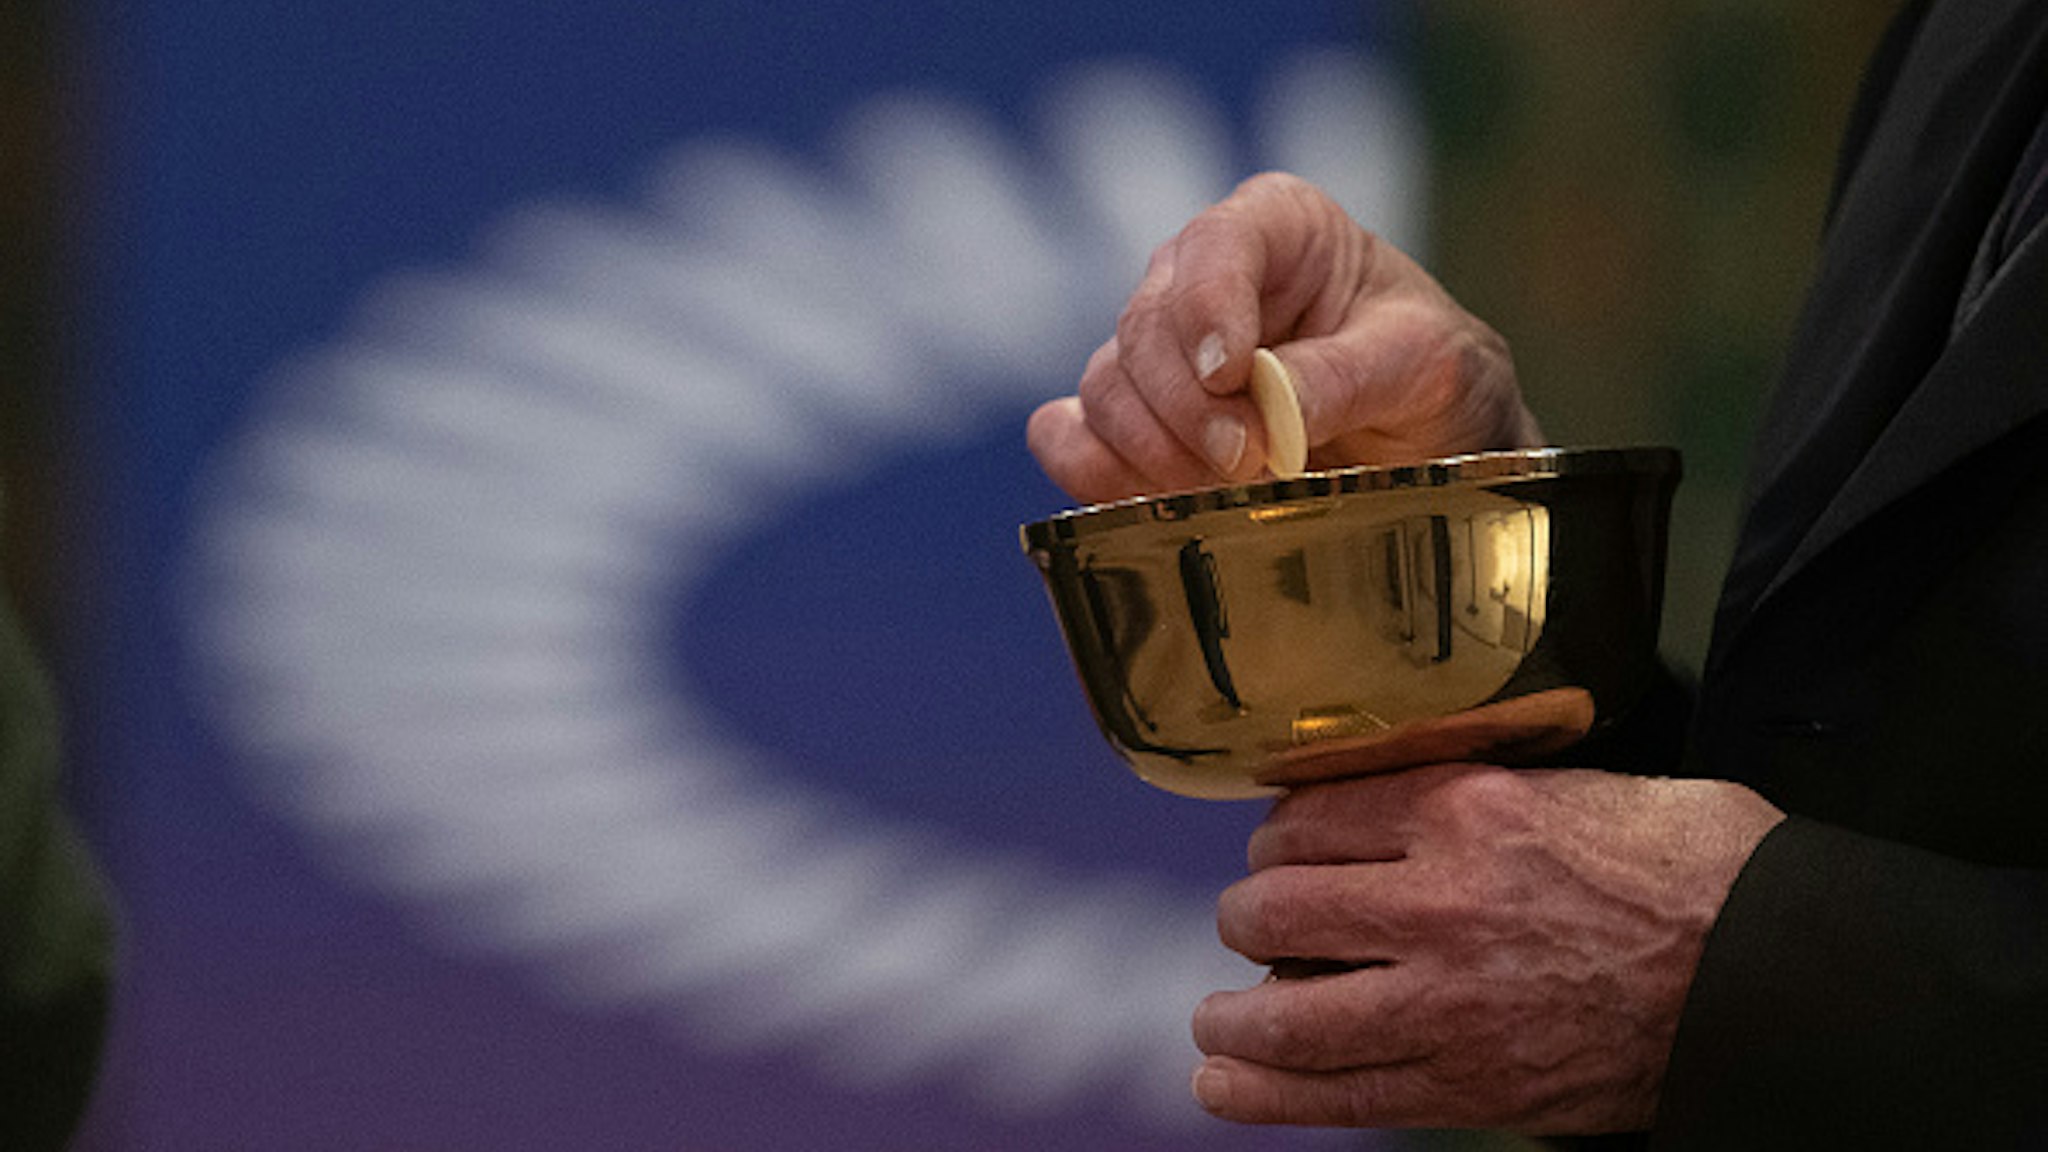 15 May 2021, Hessen, Frankfurt/Main: A member of the church congregation holds a wafer in his hand in front of the logo of the ÖKT during a service with communion in the Catholic Cathedral of St. Bartholomew. The service is being held as part of the 3rd Ecumenical Church Day. Four services will be held simultaneously in the city, all under the motto "Celebrating the Eucharist in an ecumenically sensitive way". Photo: Sebastian Gollnow/dpa